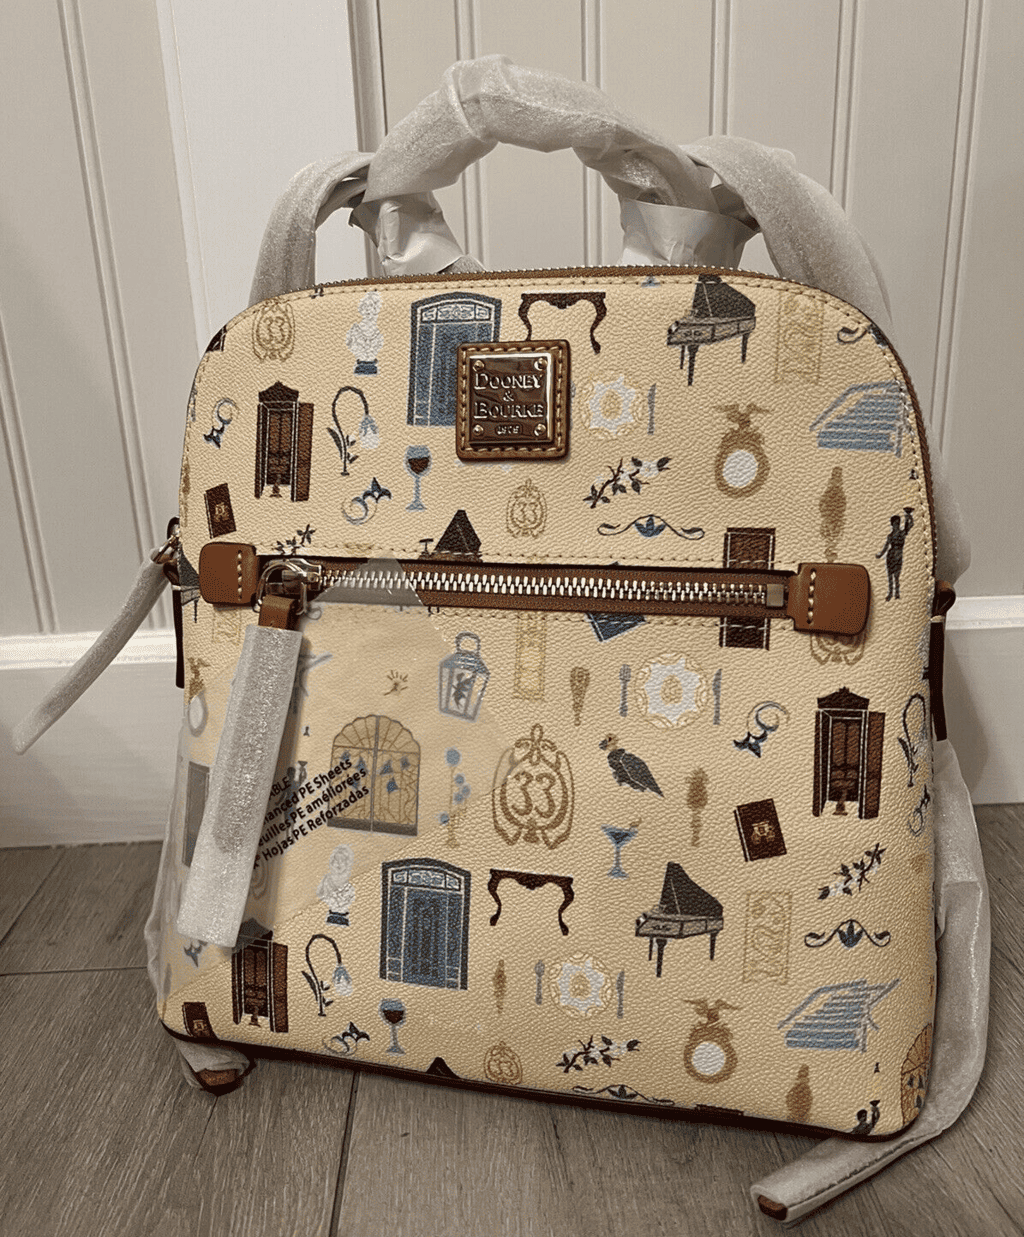 Club 33 Men's Leather Collection by Disney Dooney and Bourke - Disney  Dooney and Bourke Guide